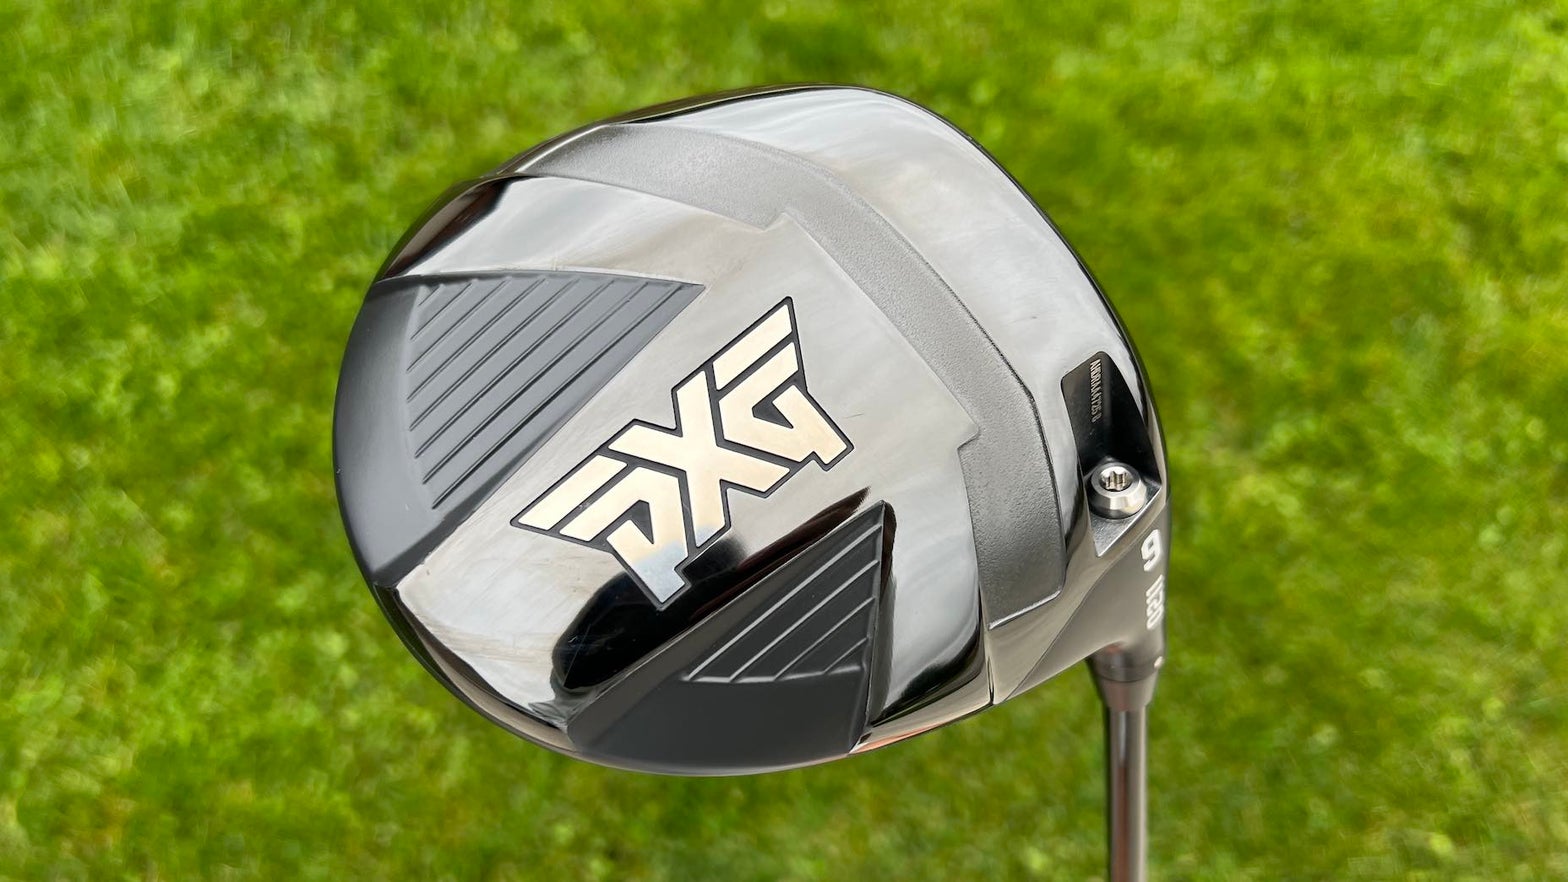 PXG's new 0211 drivers, fairway woods and hybrids First Look